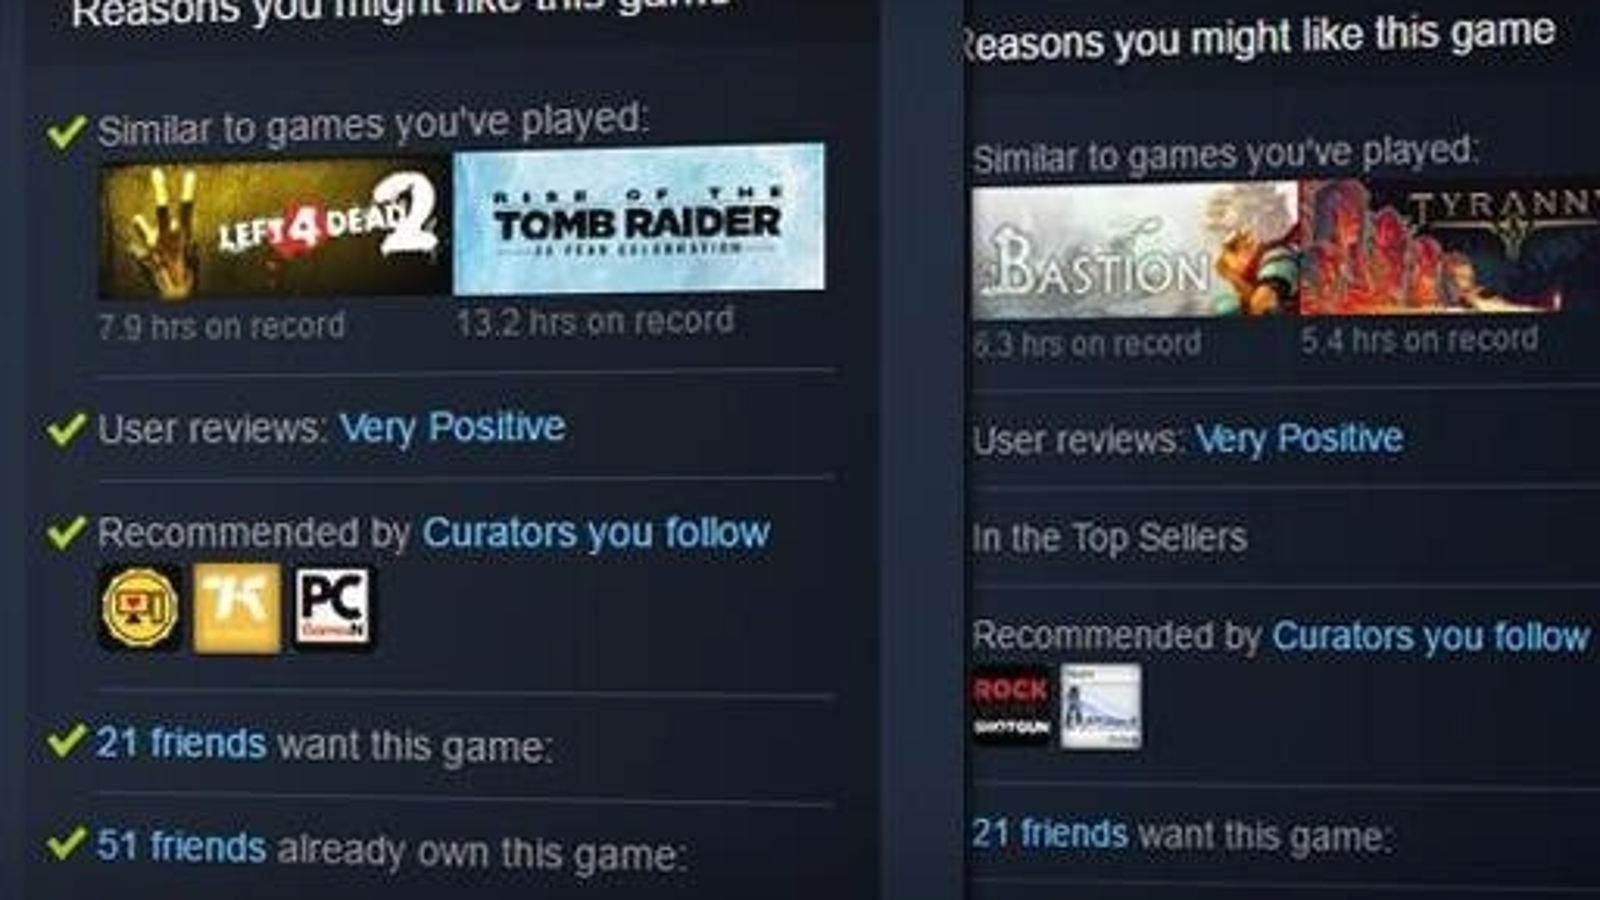 Разум геймс. Steam Now owns. List of recommendations in Steam. You want these games